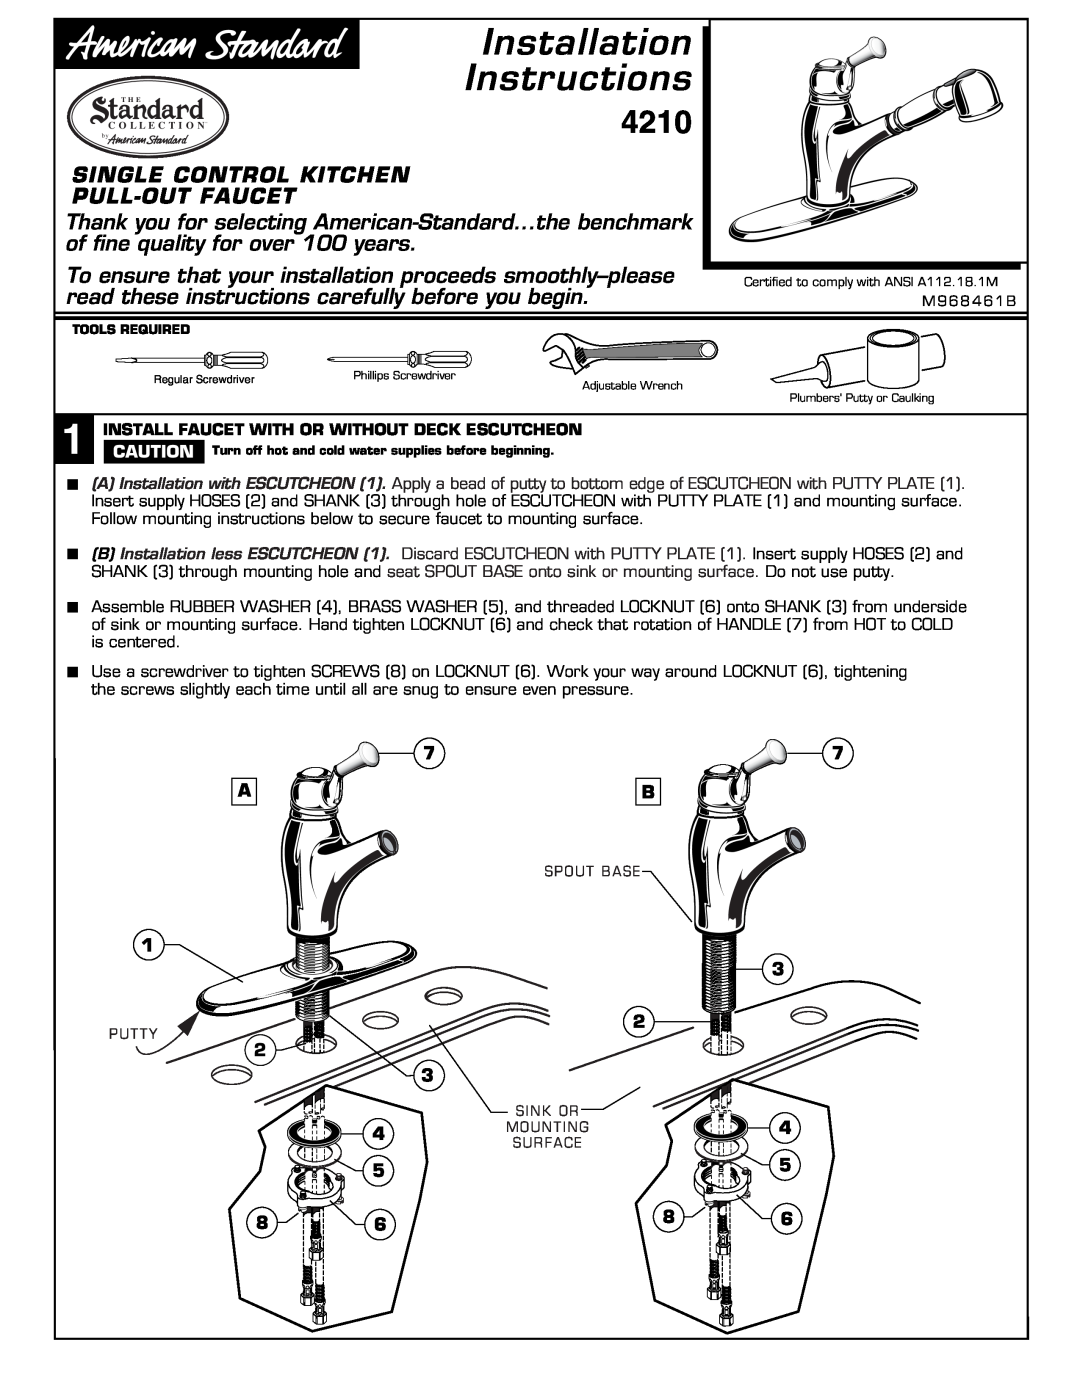 American Standard 4210 installation instructions Single Control Kitchen Pull-Outfaucet, Installation Instructions 